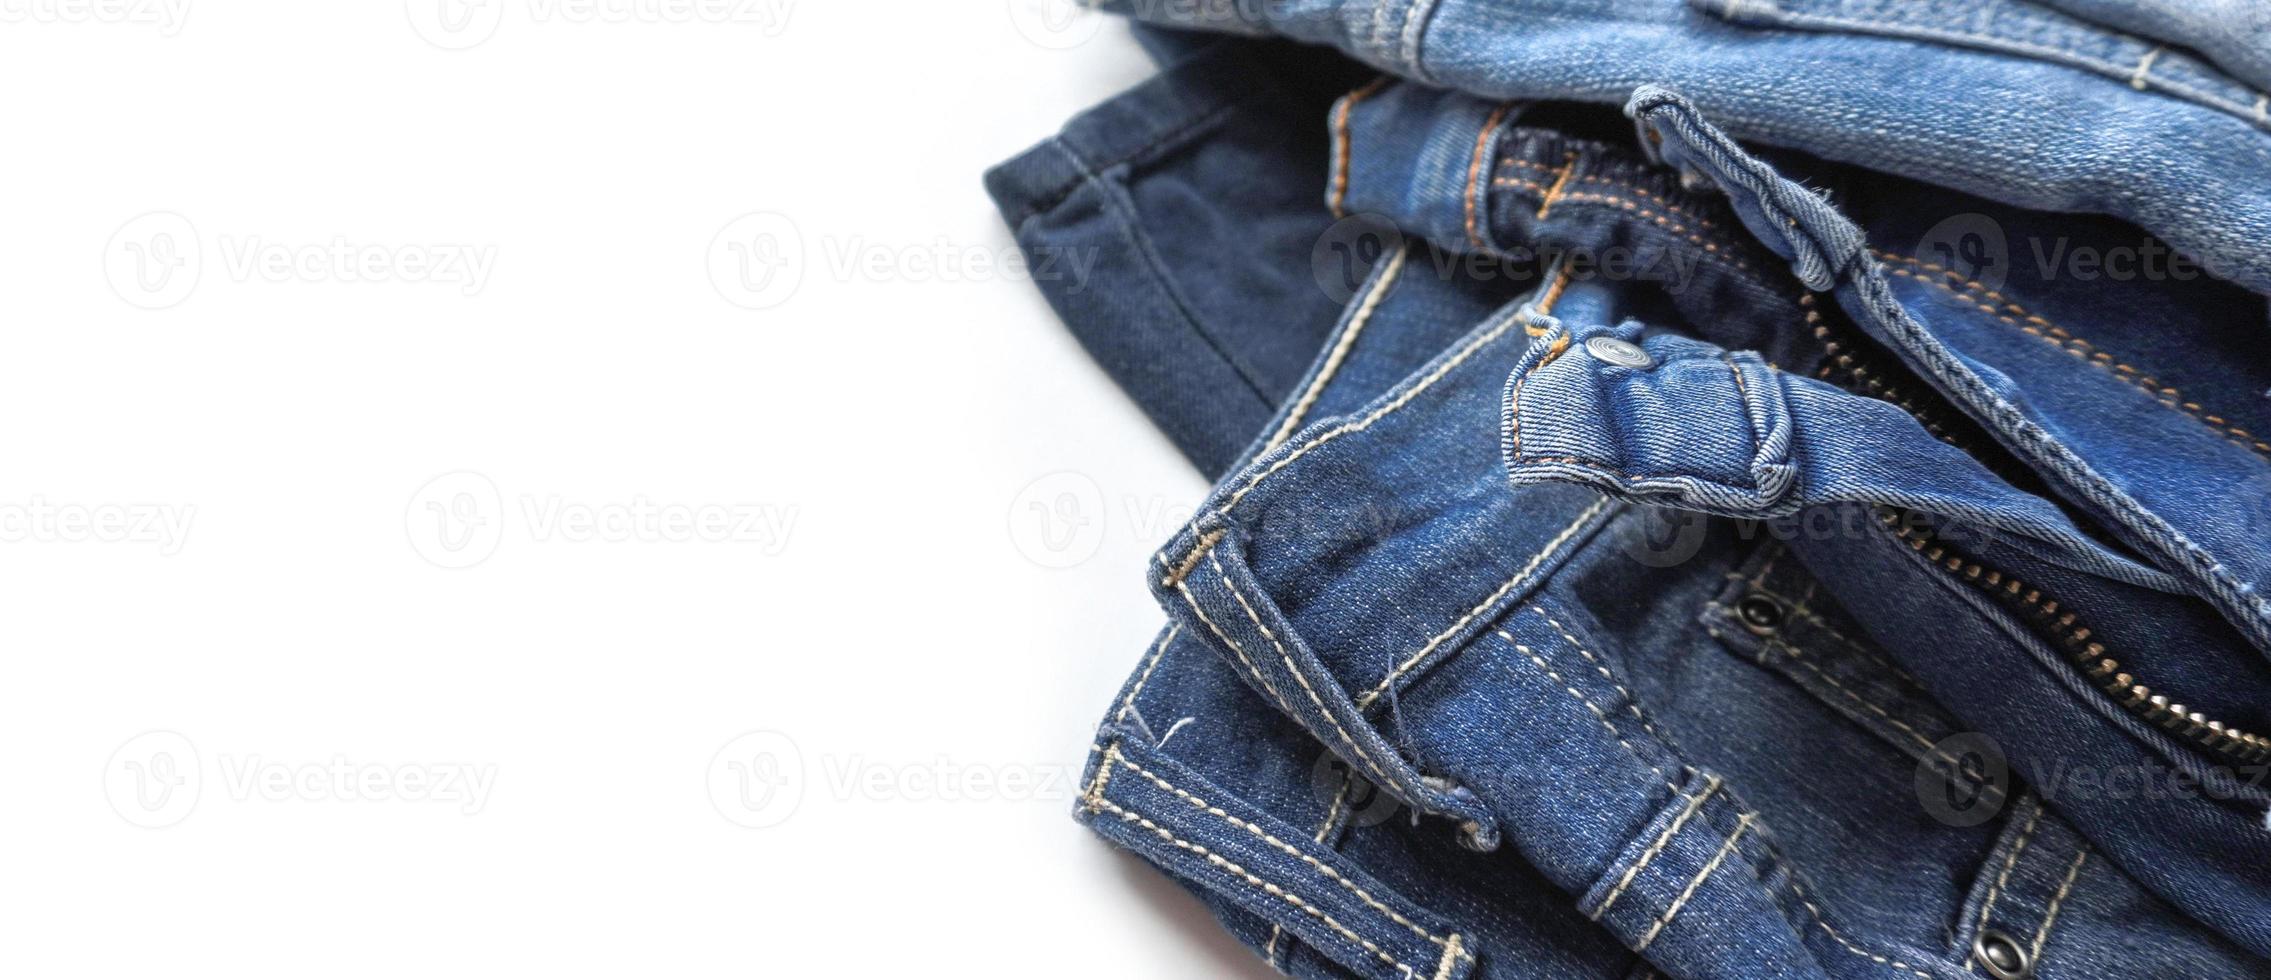 Denim jeans of different shades on white background banner with copy space photo